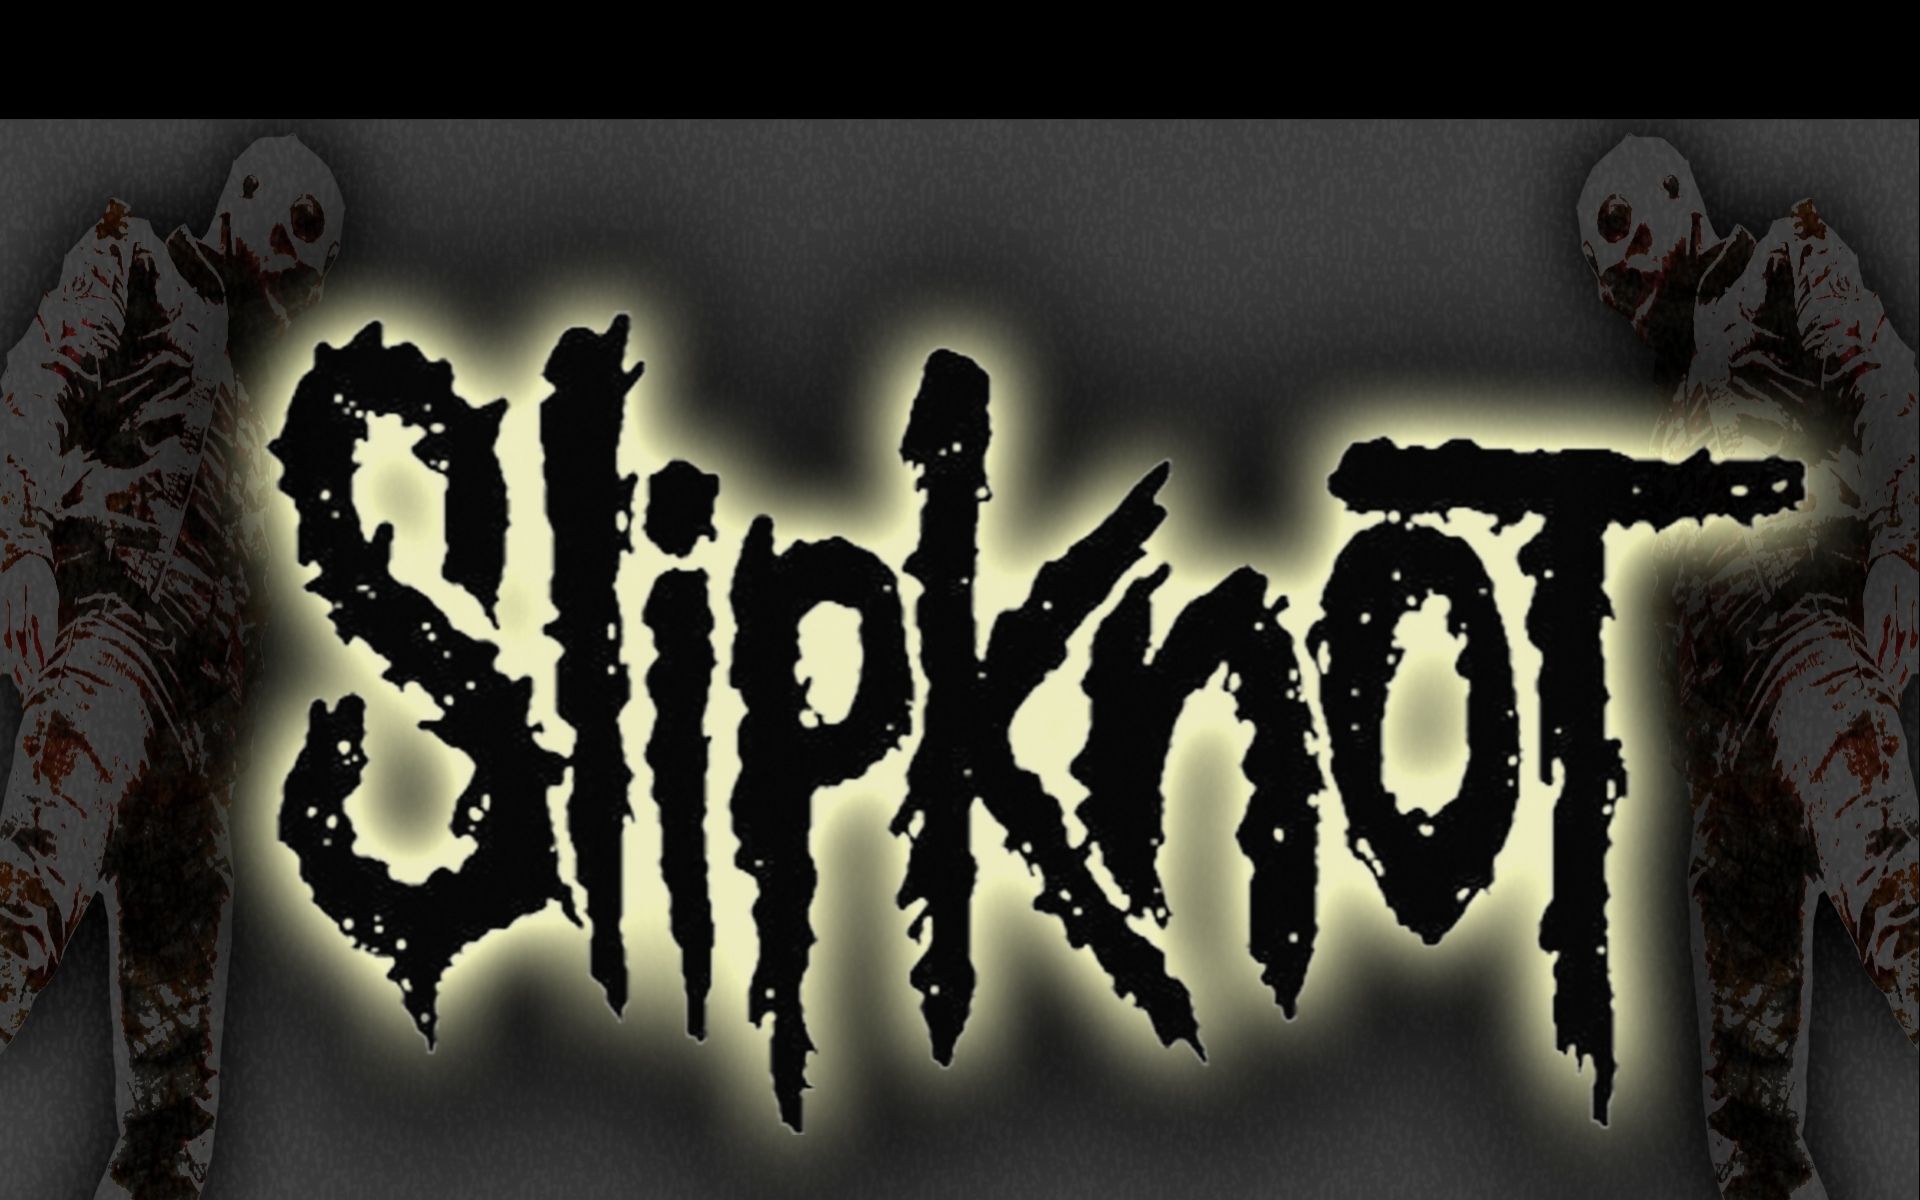 Slipknot #641620 | HD Wallpapers pack download free